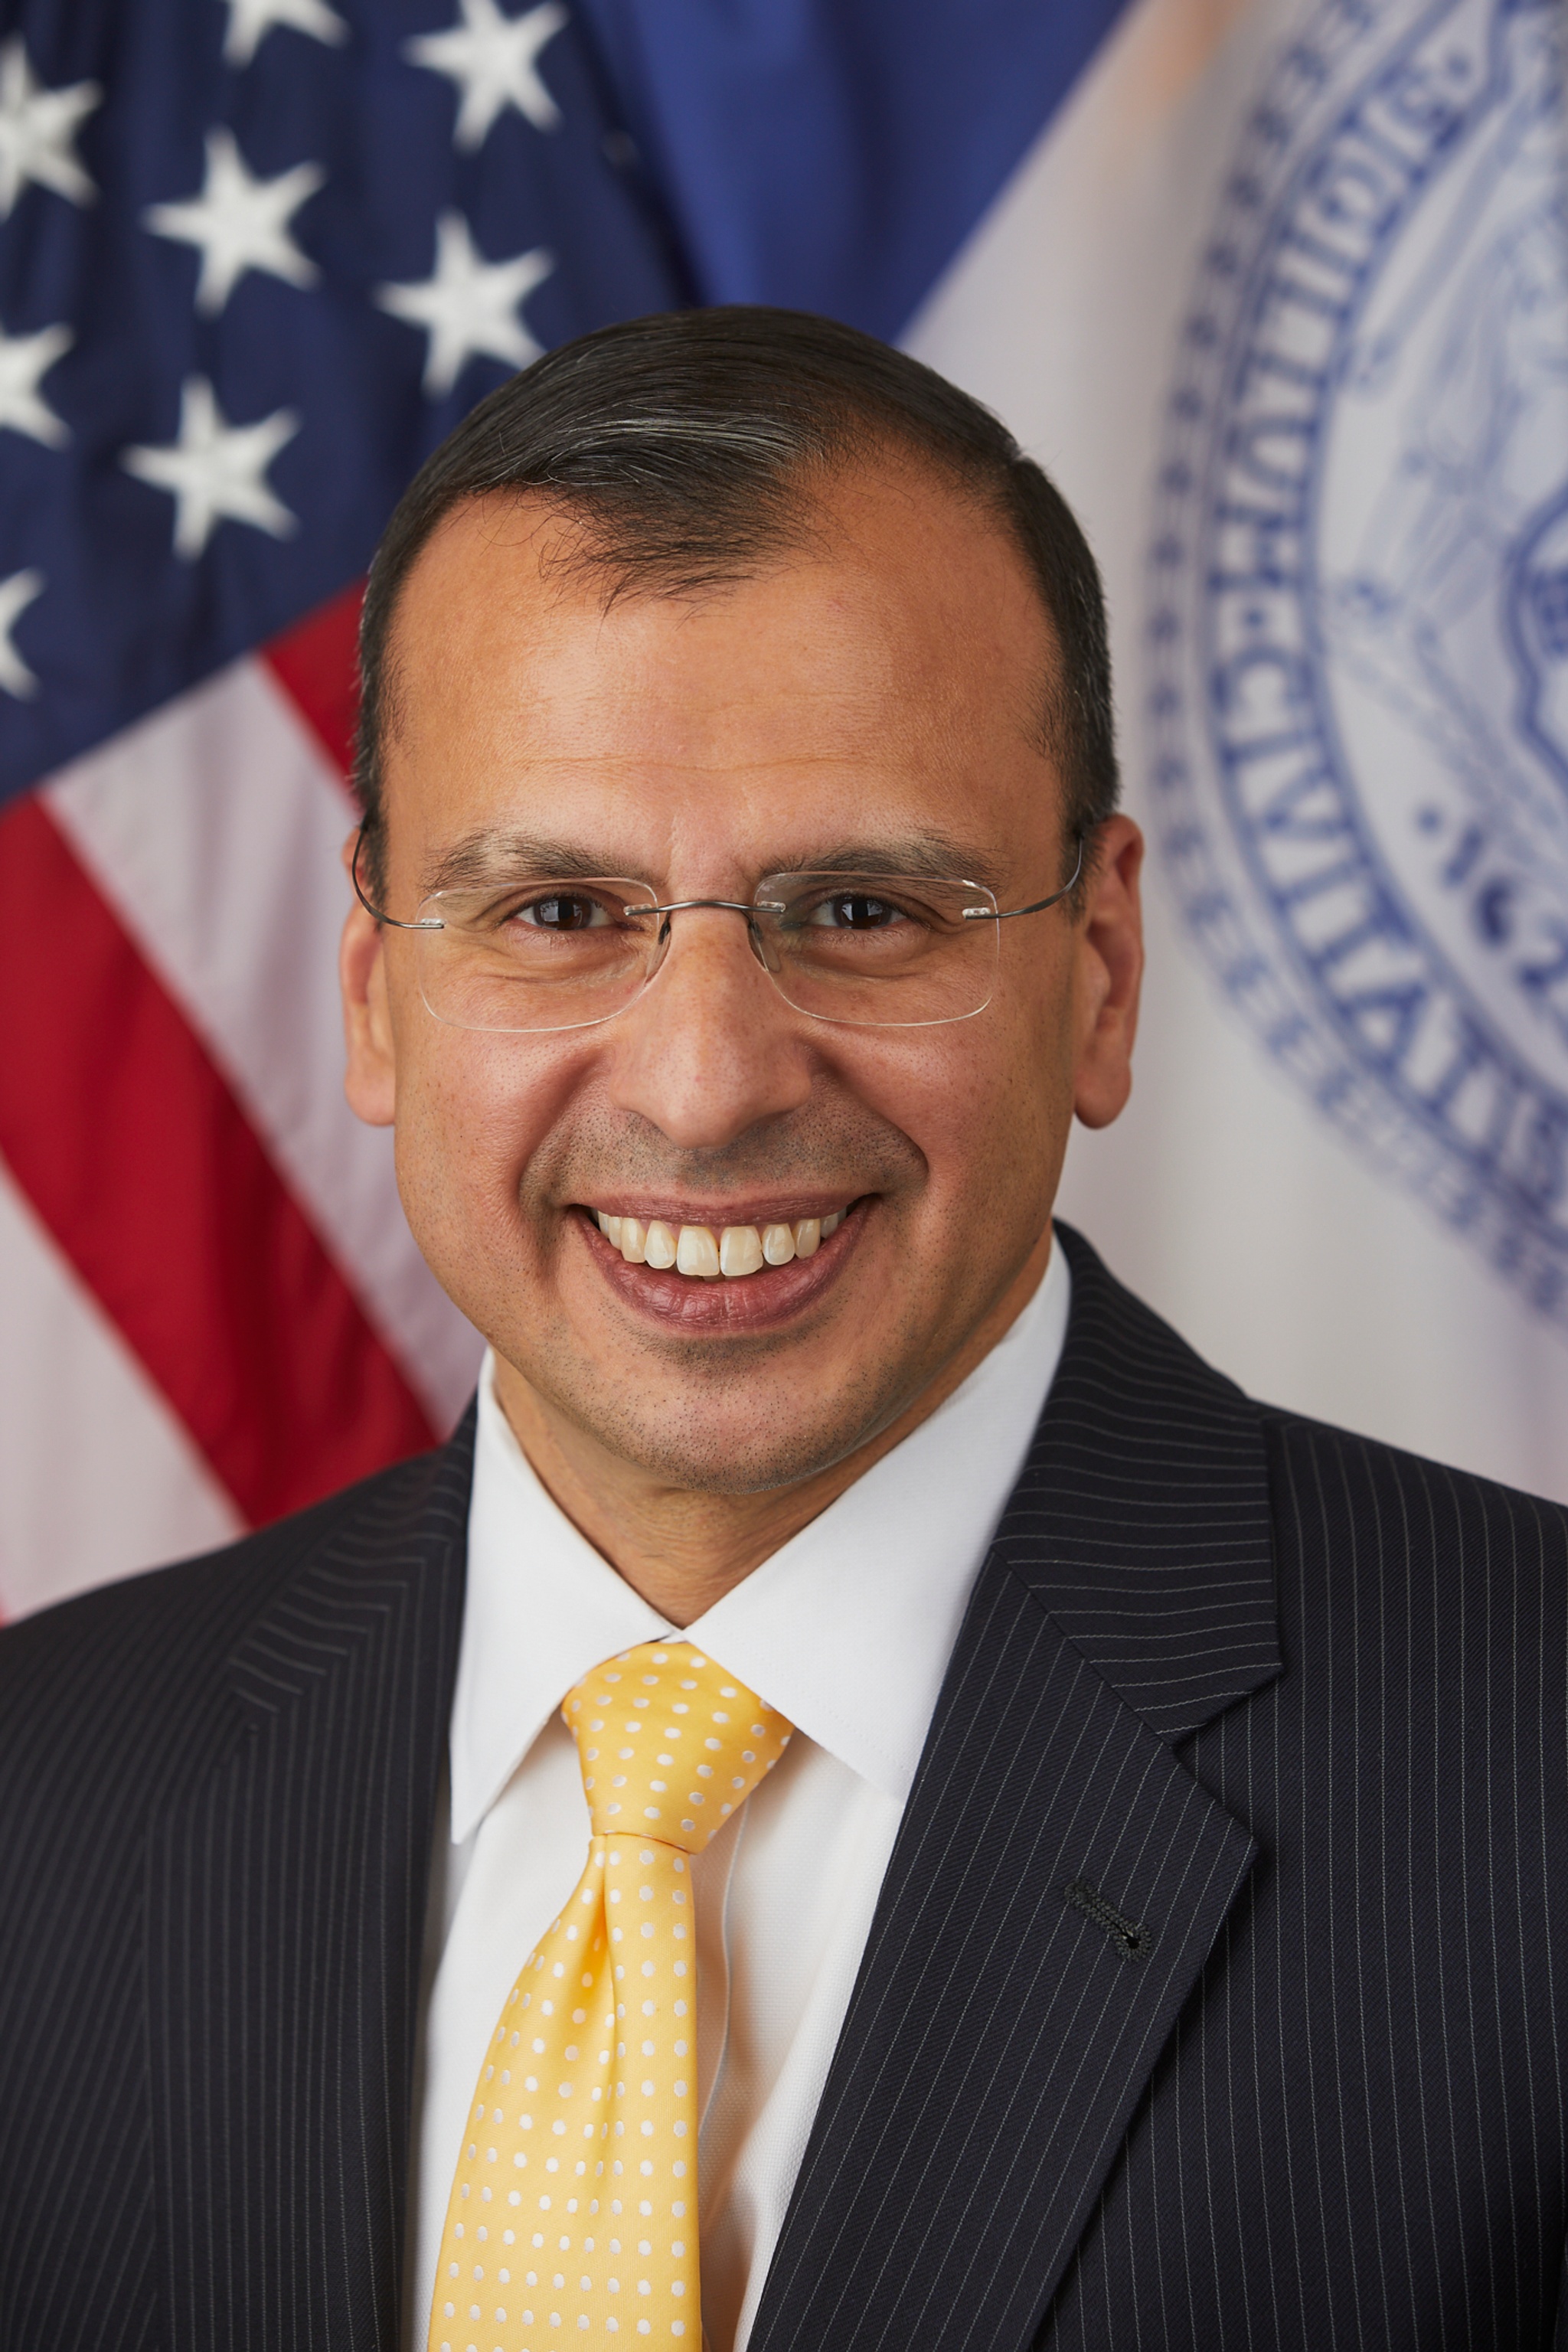 A portrait of Rit Aggarwala. He wears a suit with a yellow tie and smile broadly against a backdrop of the American and NYC flags